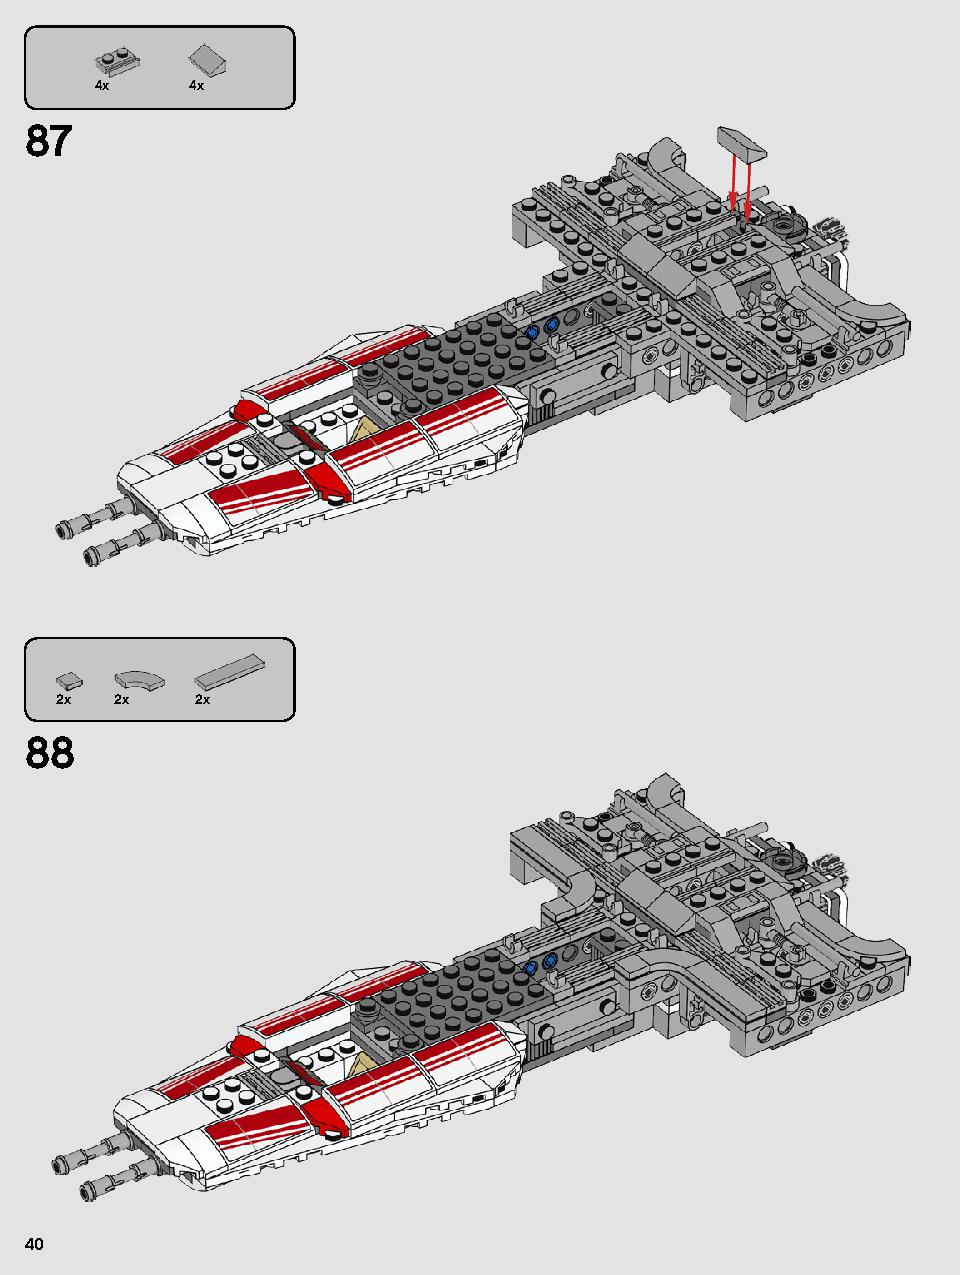 Resistance Y-Wing Starfighter 75249 LEGO information LEGO instructions 40 page